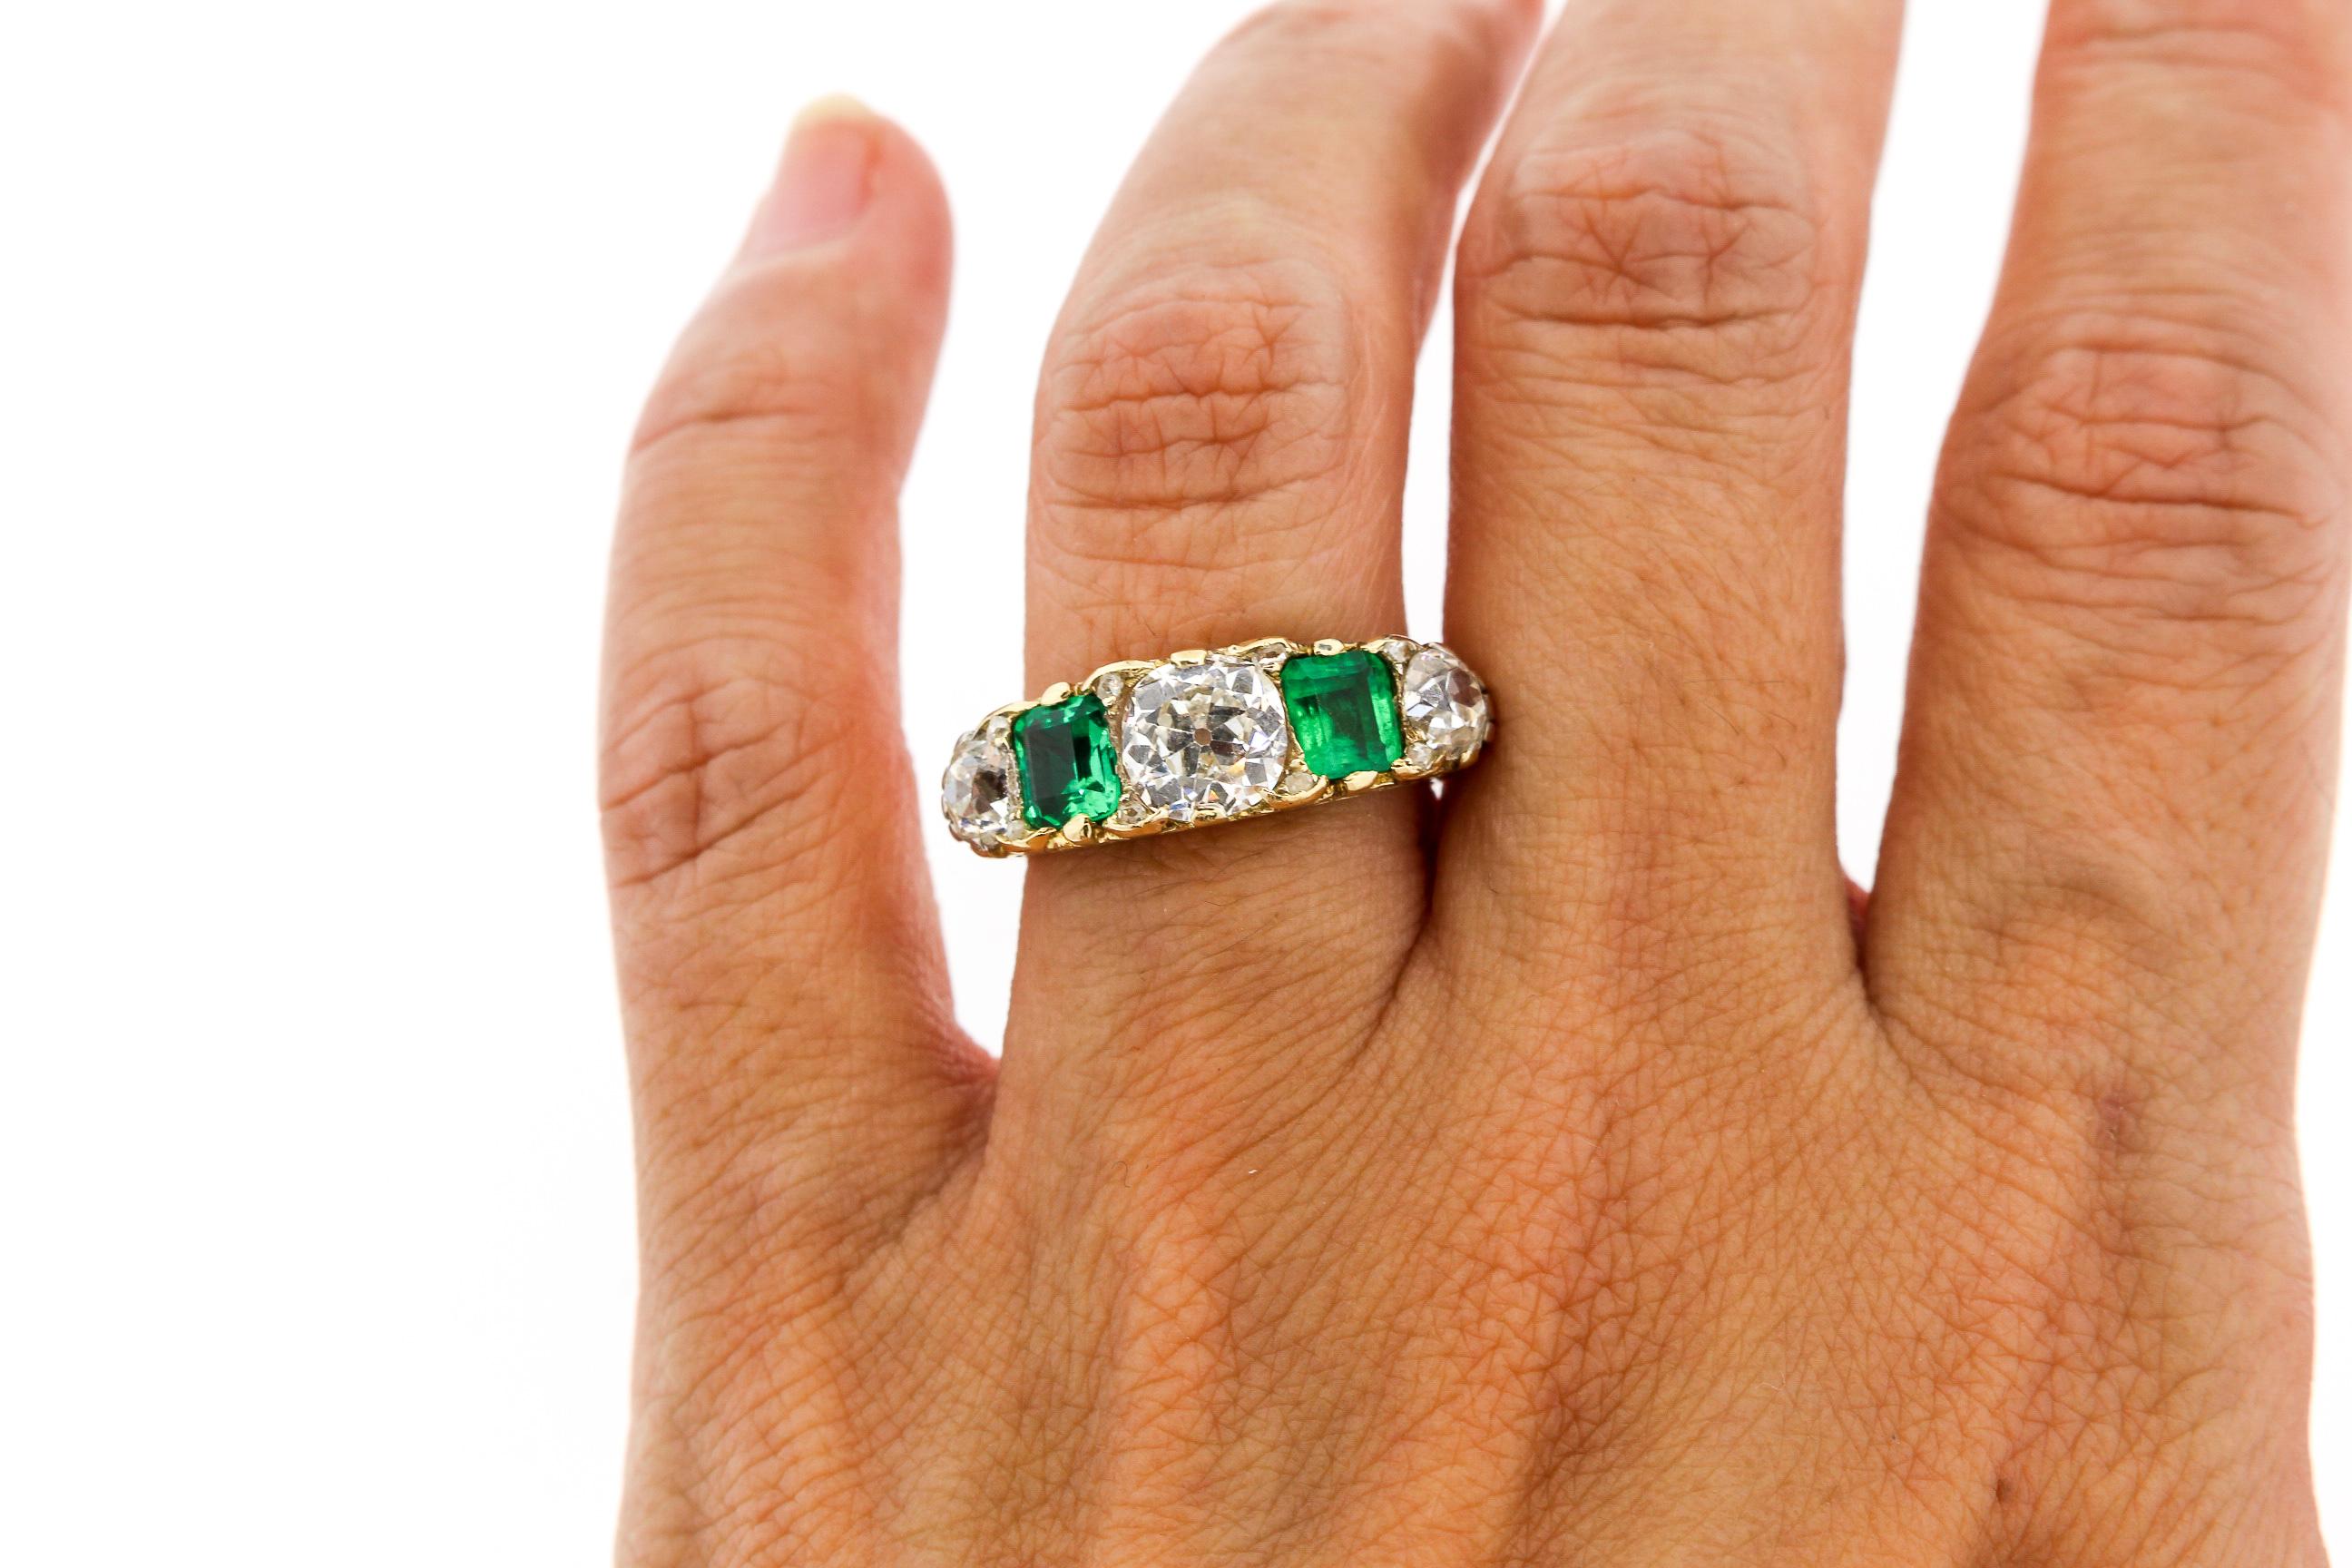 A bright Victorian emerald and Old Mine cut diamond half hoop five stone ring dating to about 1880. The ring centers on an Old Mine cut diamond weighing approximately 1.15 carats that is graded as an I color and VS2 clarity. The two other diamonds